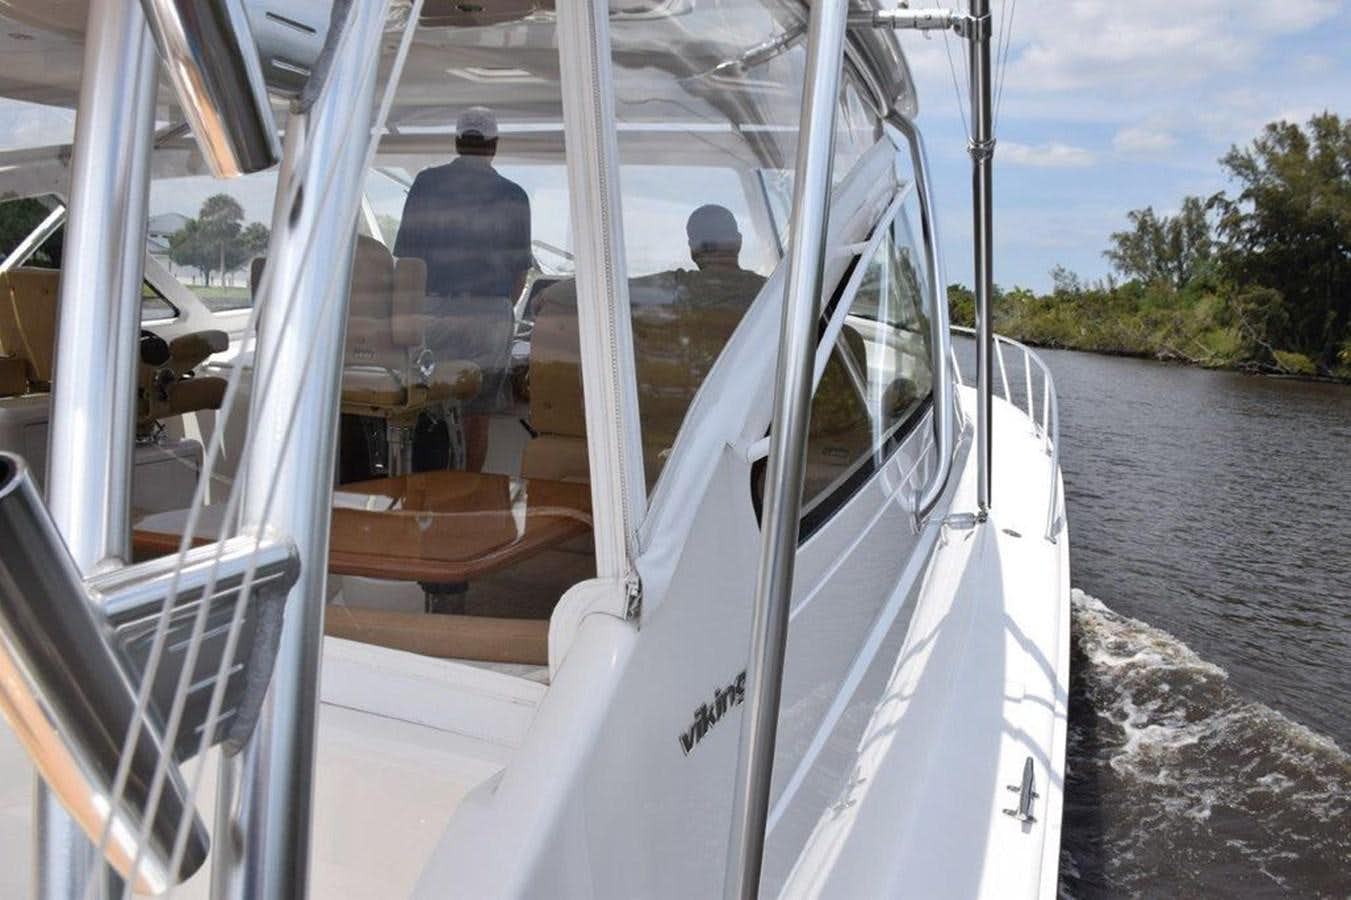 52 viking open 2016
Yacht for Sale